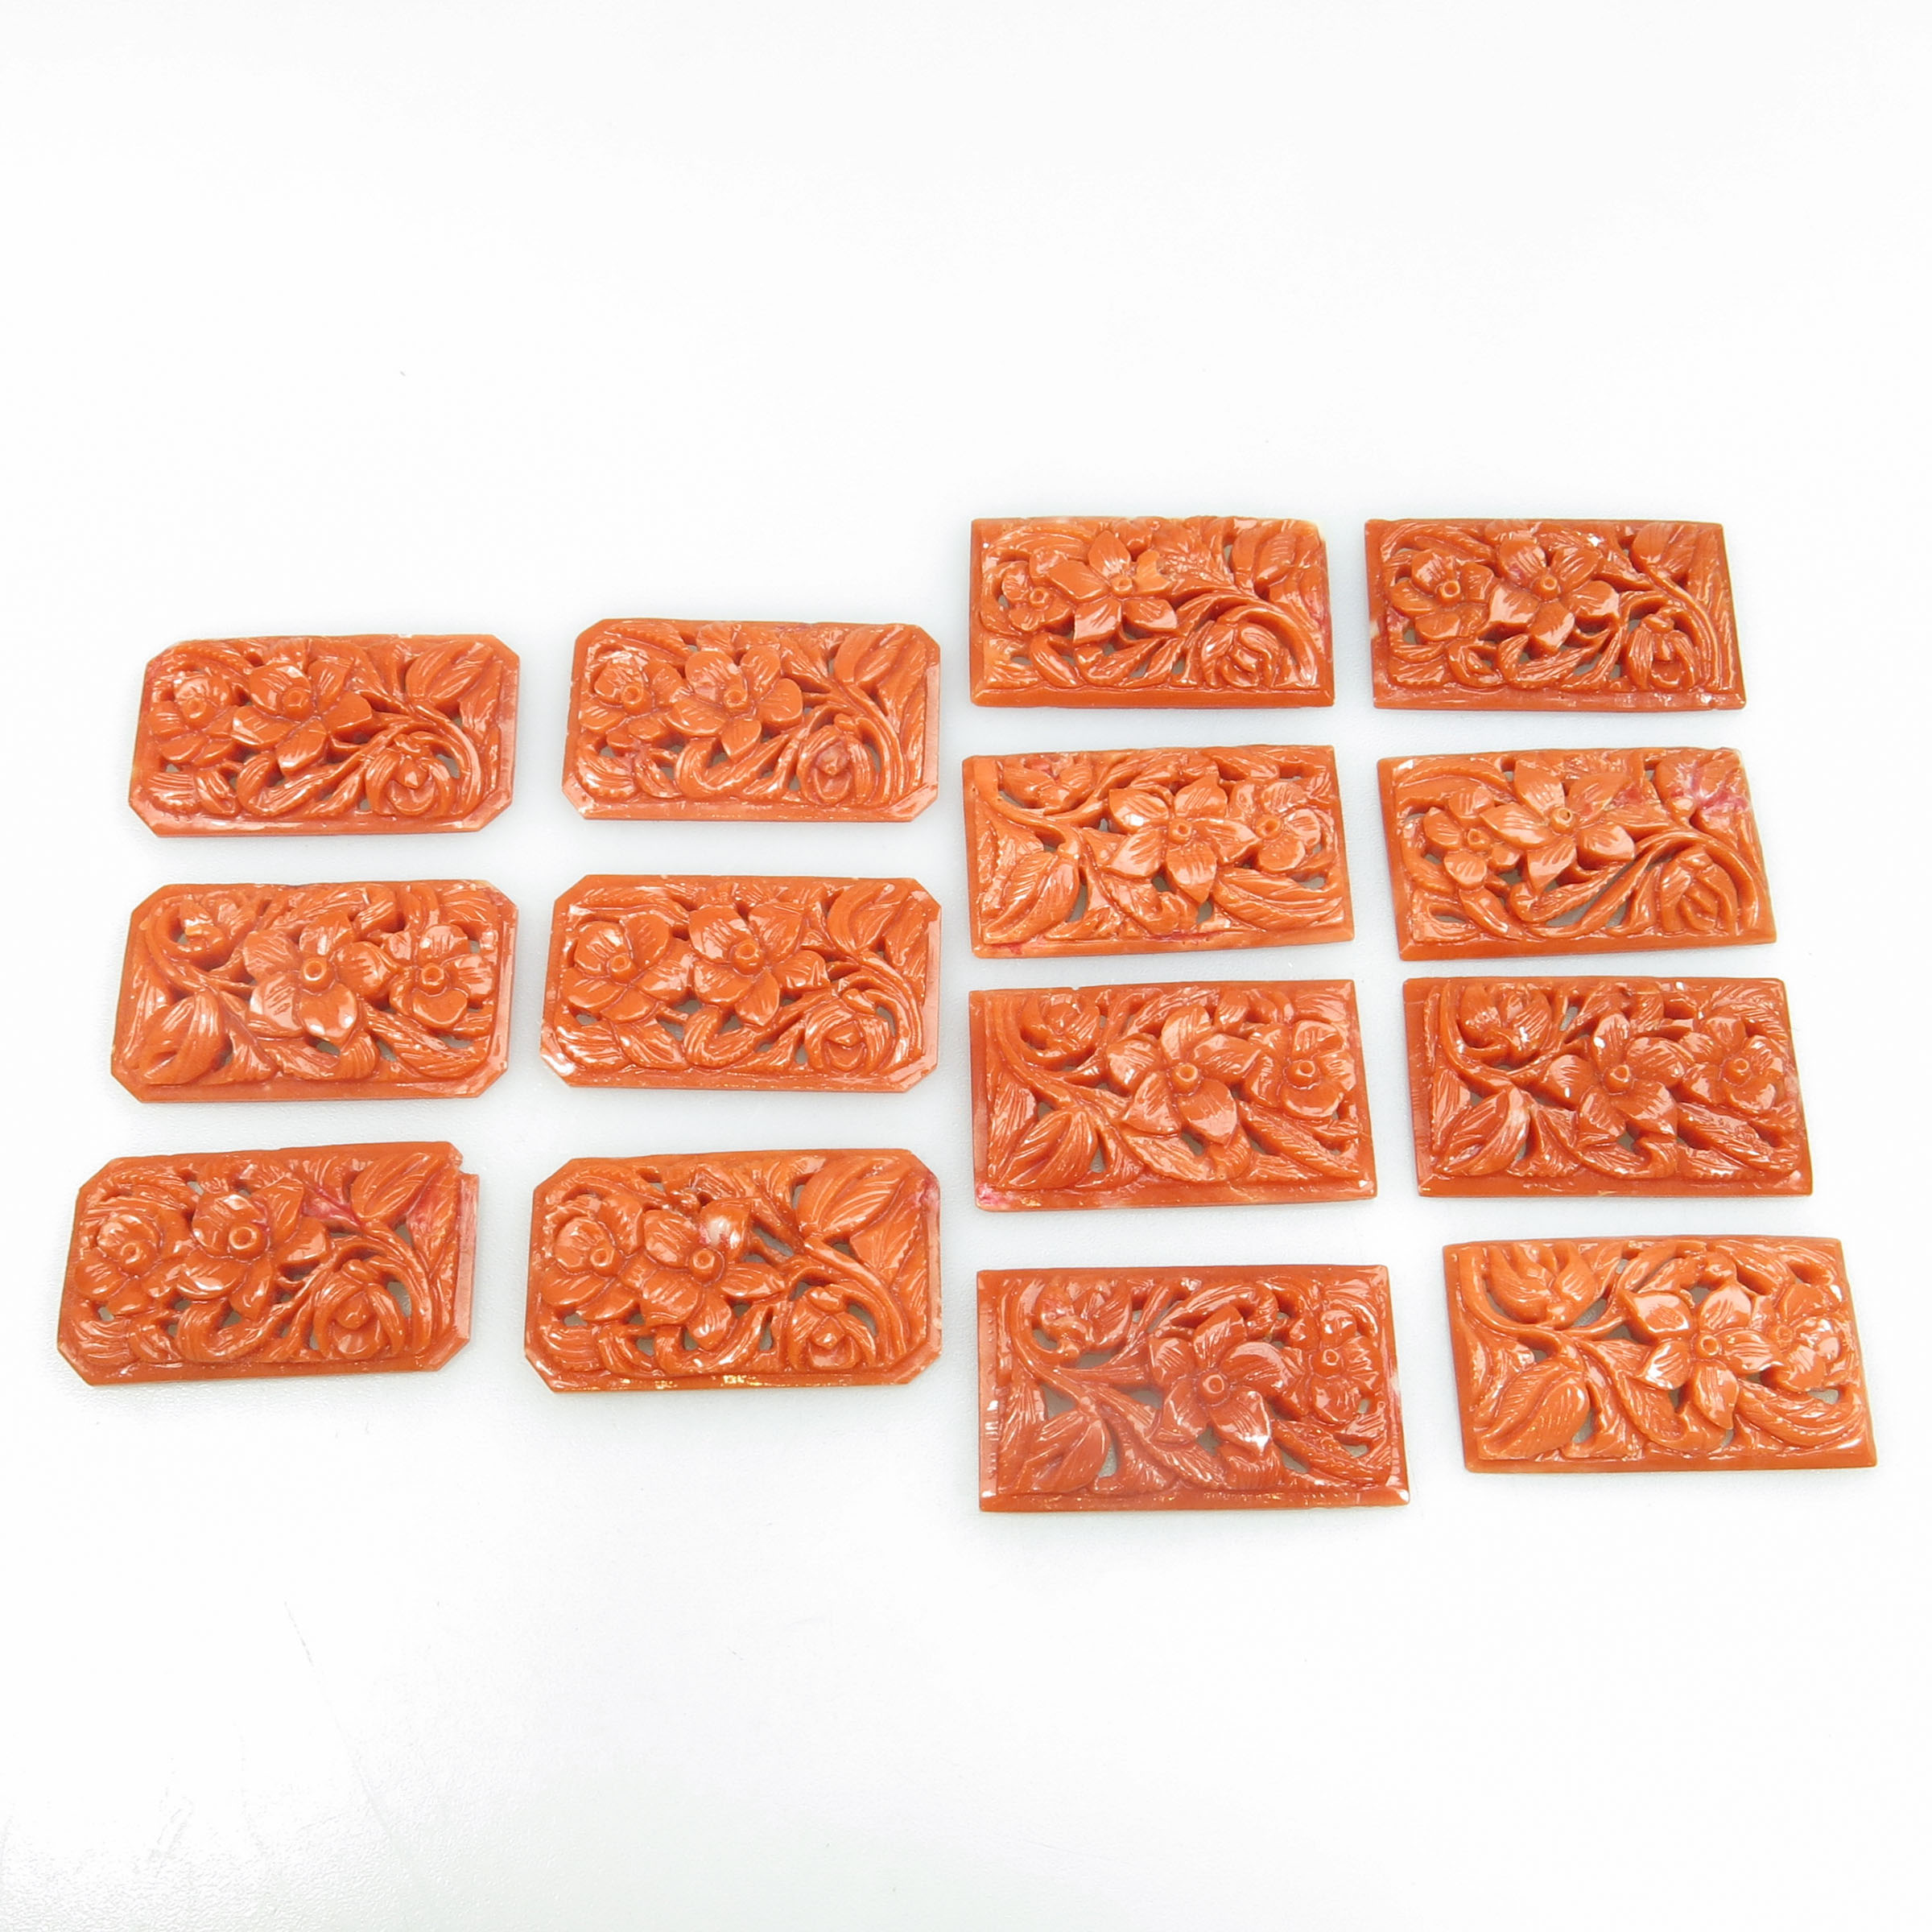 14 Carved And Pierced Rectangular Coral Panels